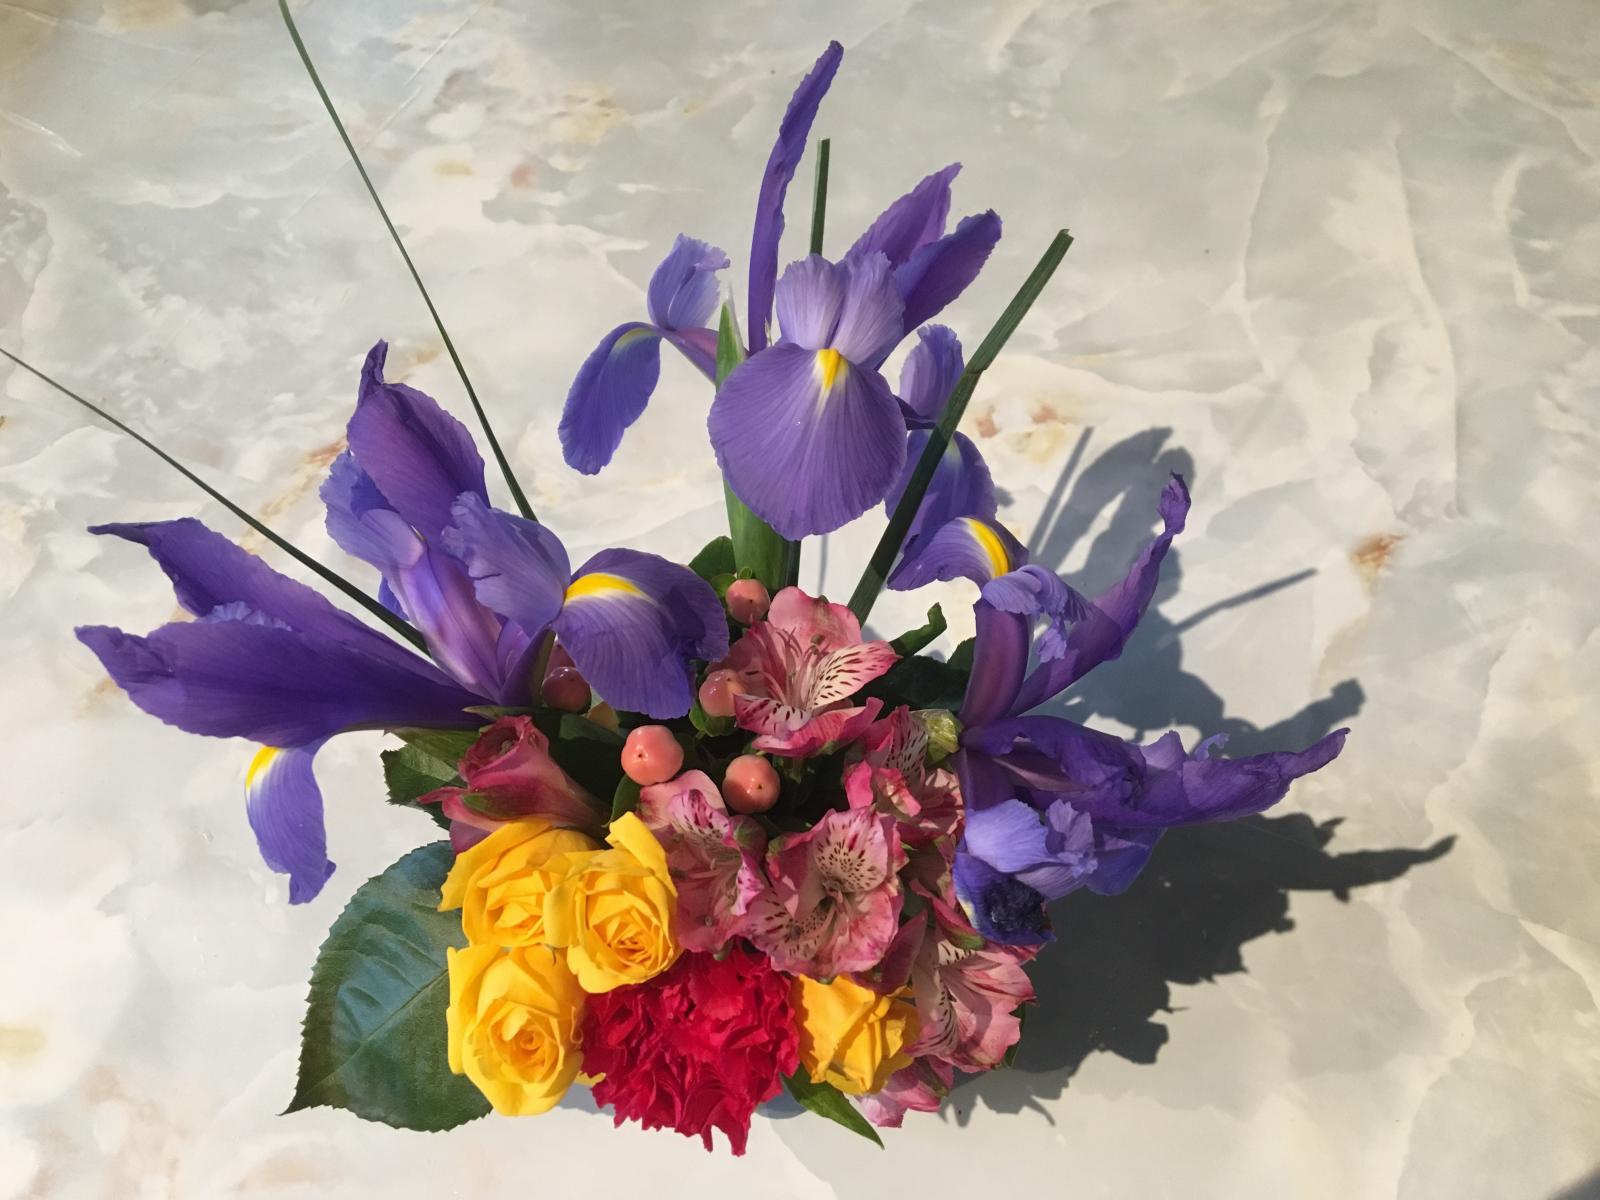 A bouquet of purple, yellow, and red flowers